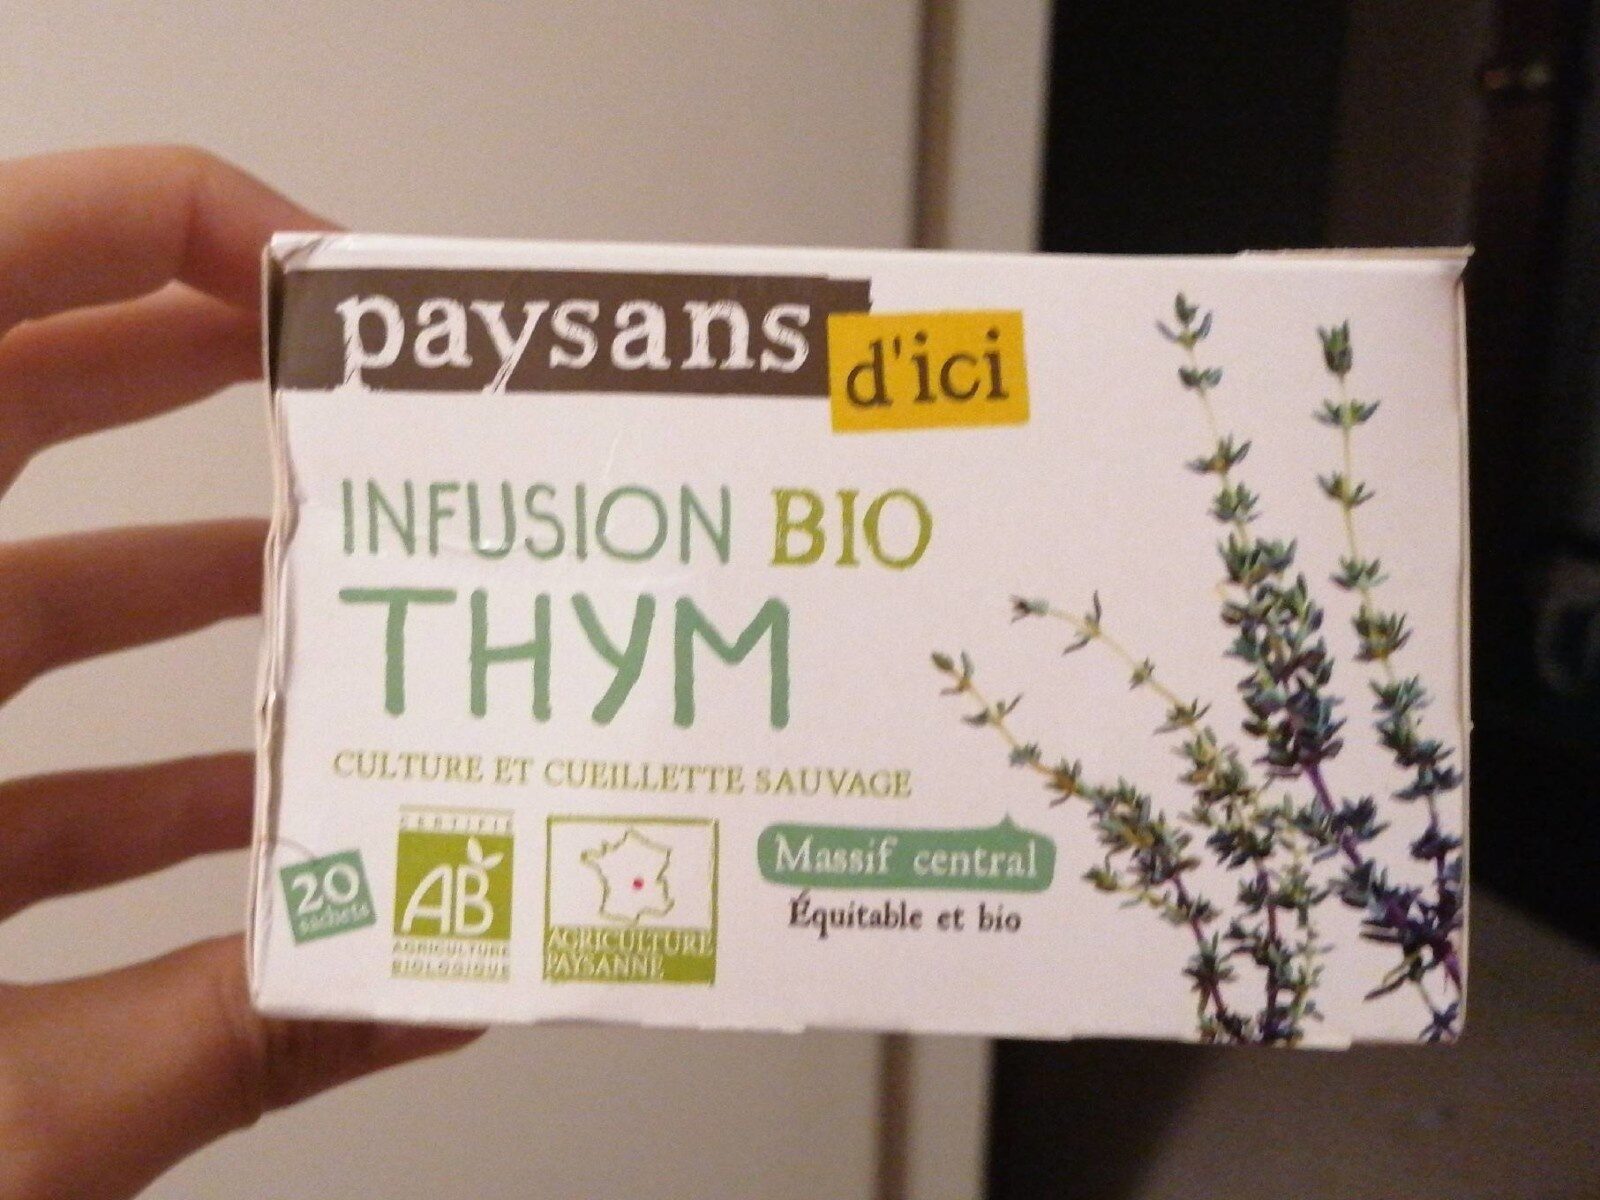 Infusion bio thym - Product - fr